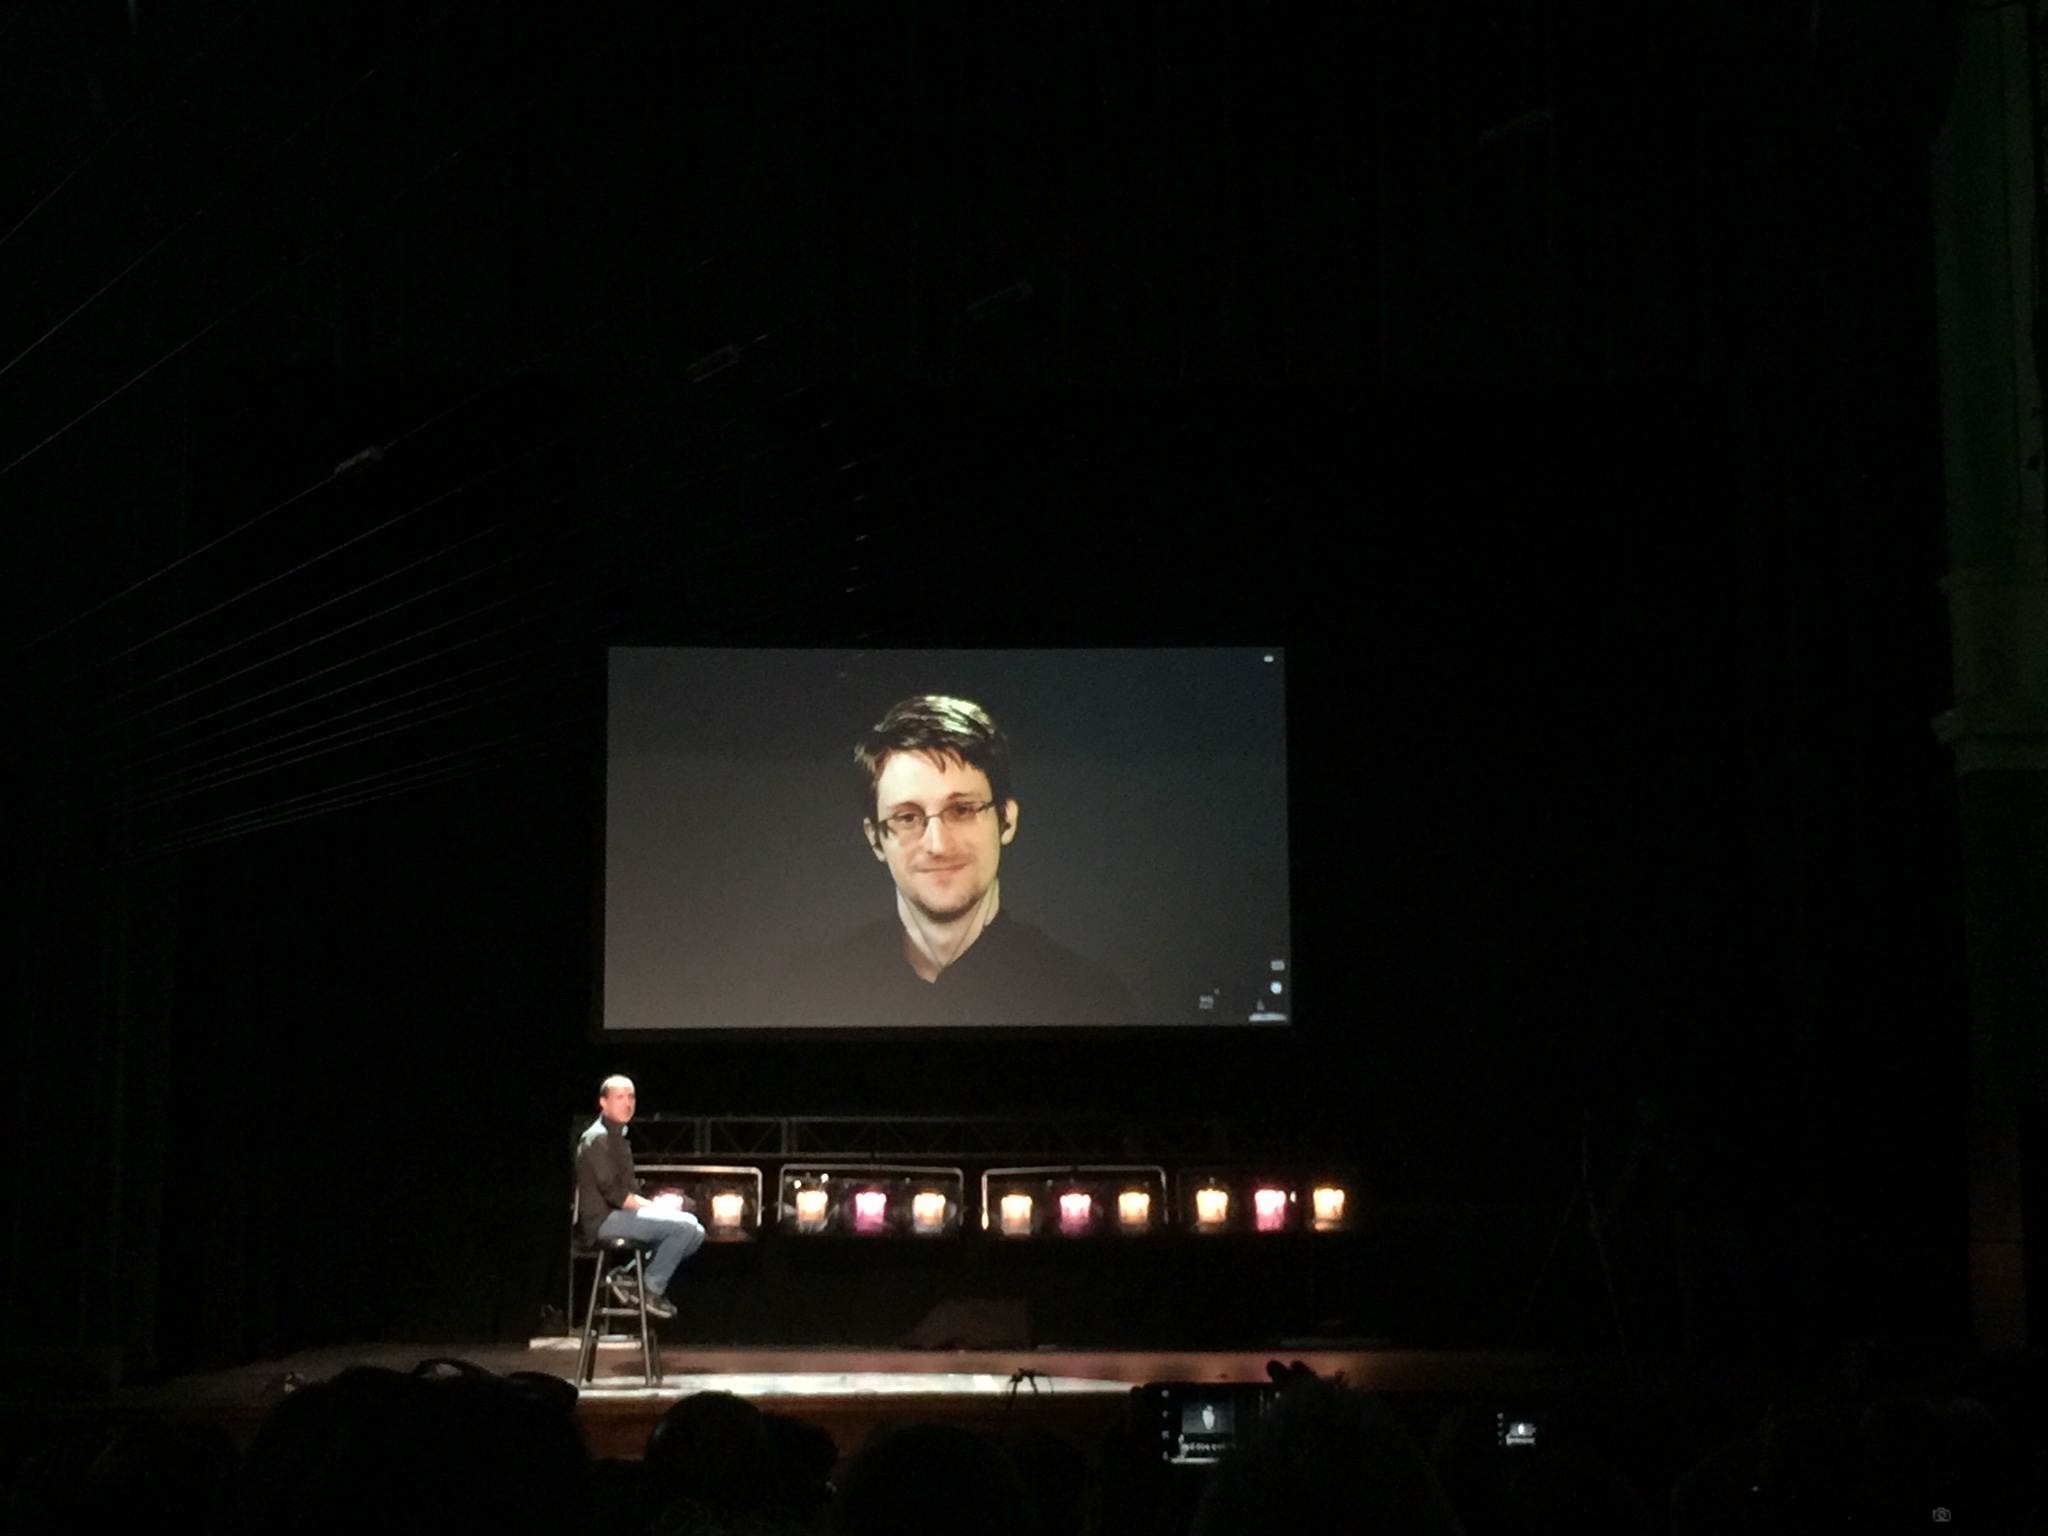 Edward Snowden joined remotely to a mixed, but mostly positive, audience reaction